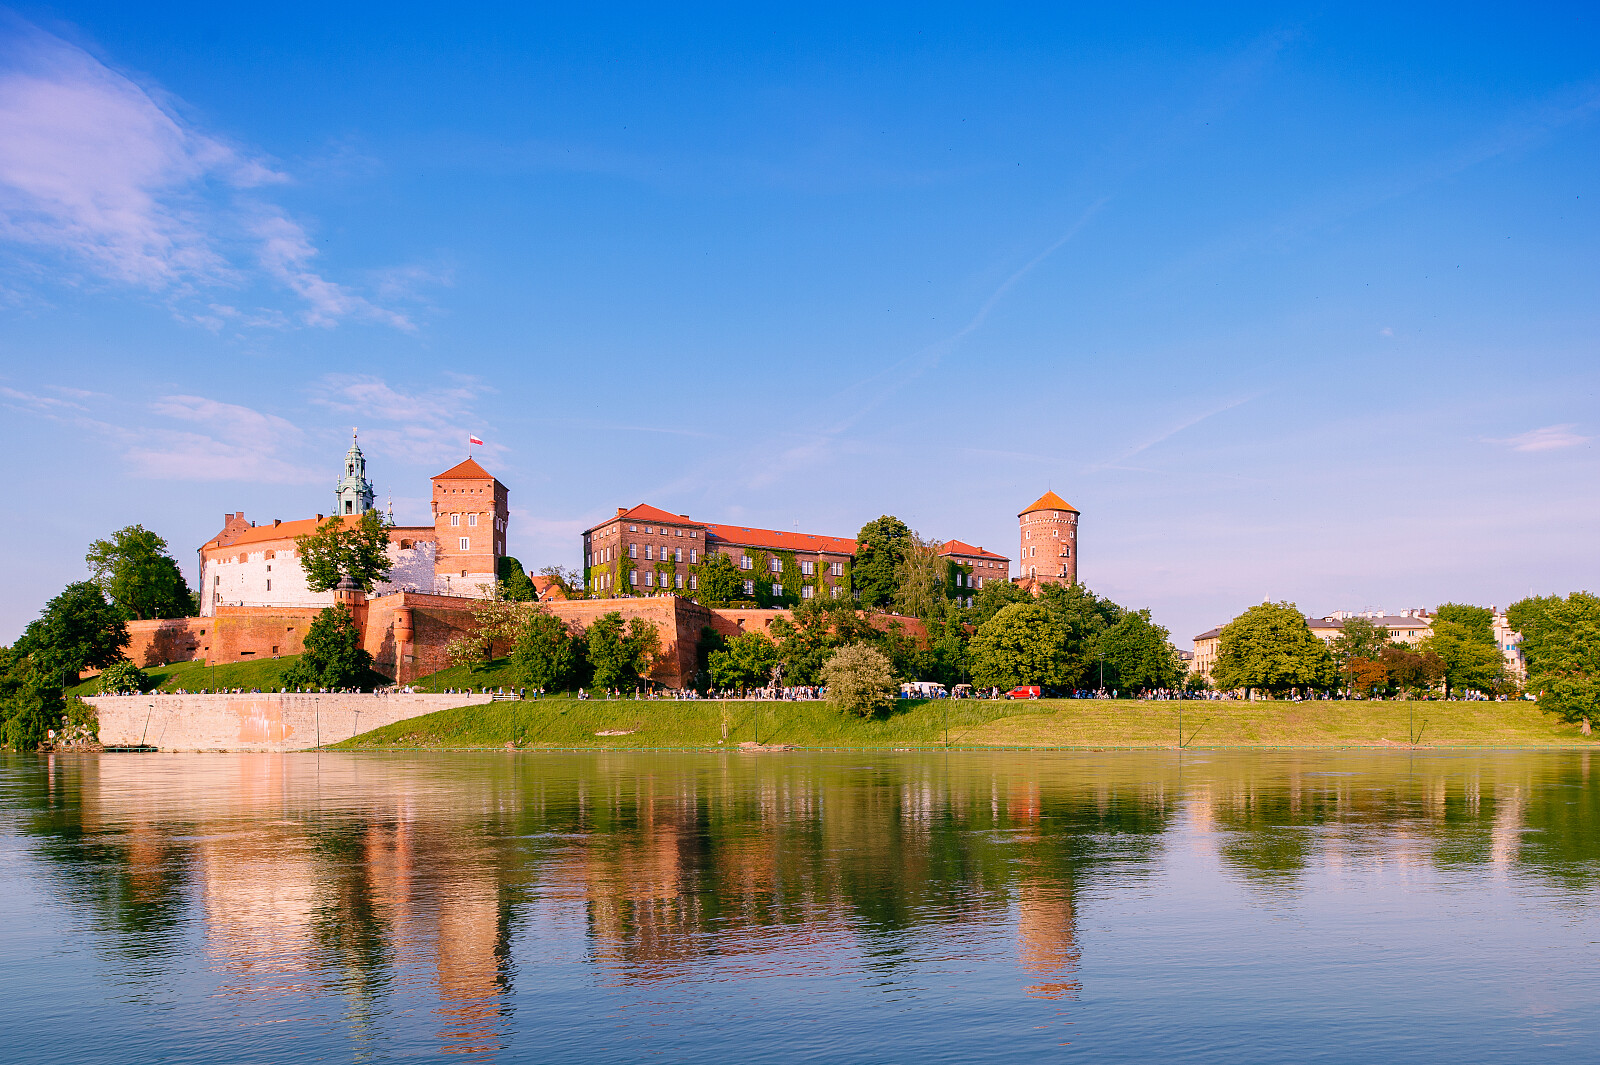 view-at-wawel-castle-in-cracow-city-krakow-poland-reflected-in-vistula-river-wisla-in-sunny-summer-day.jpg [12.32 MB]